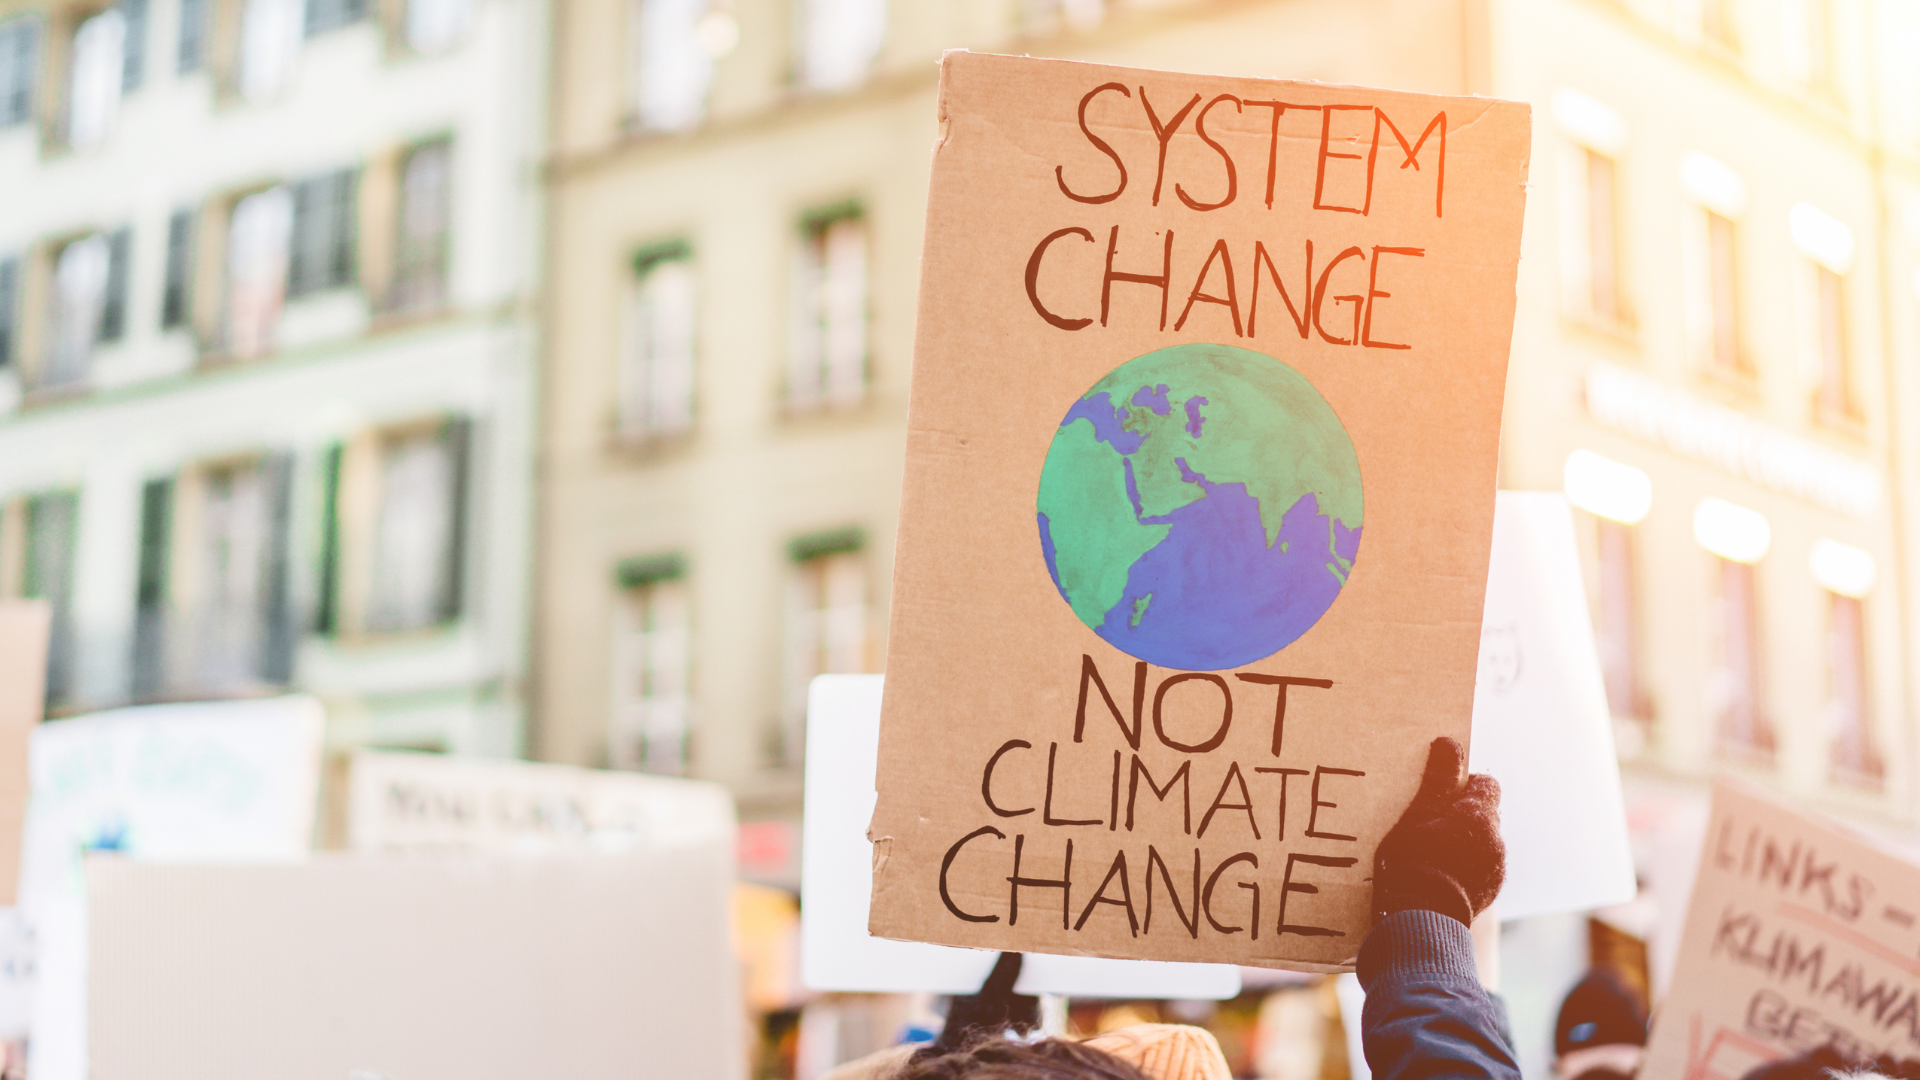 Youth climate grief project - System Change sign